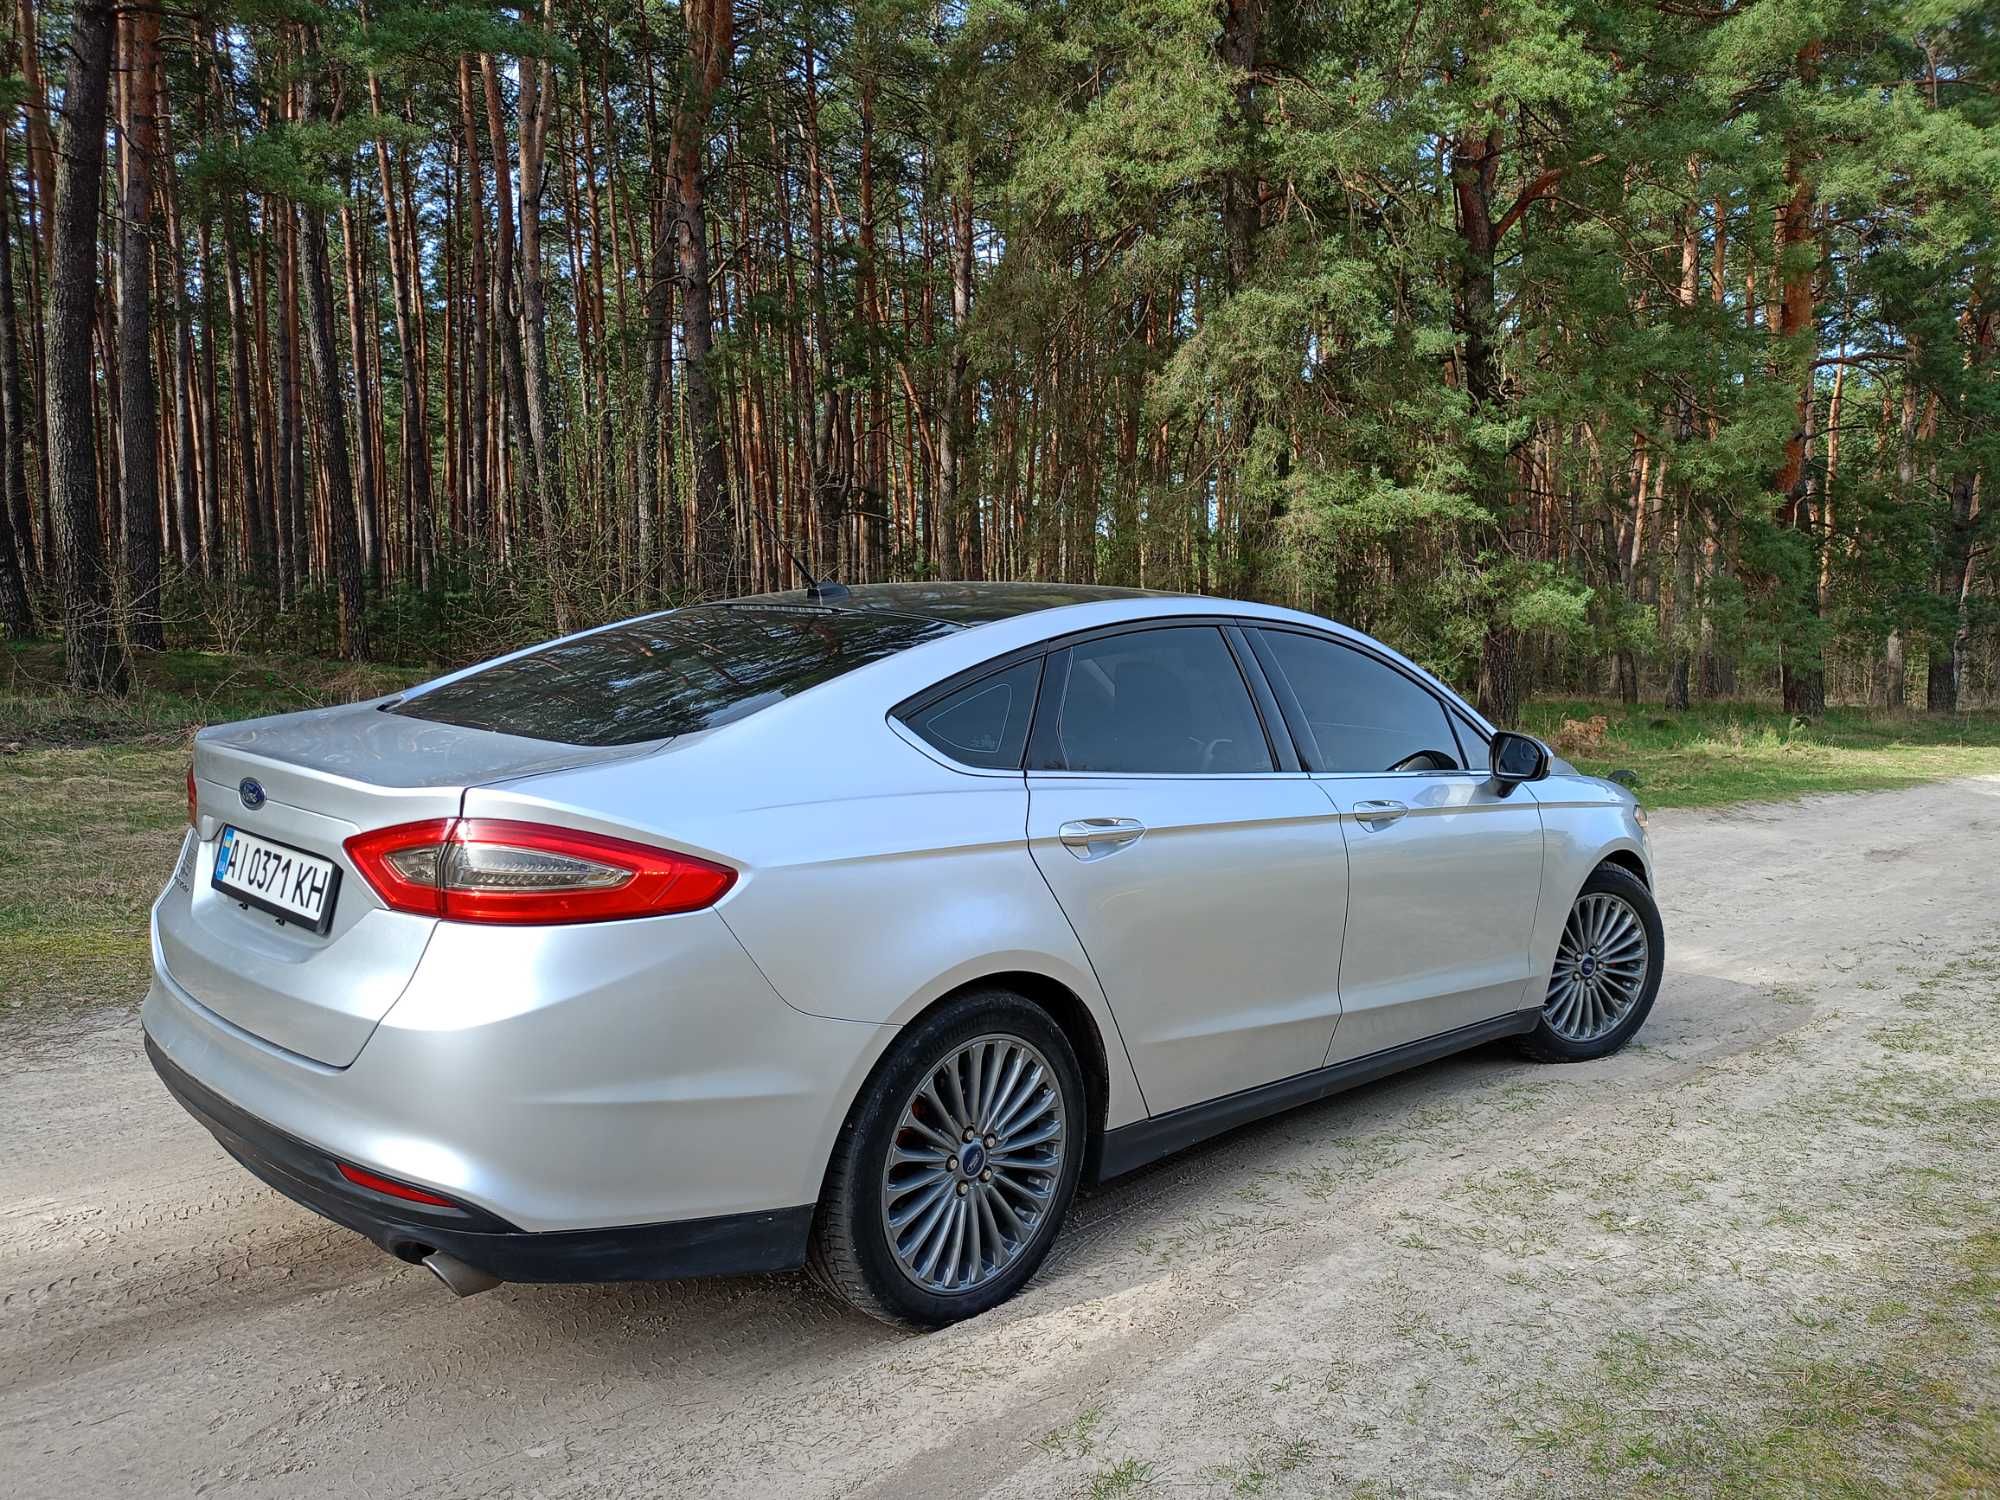 Ford fusion 2013